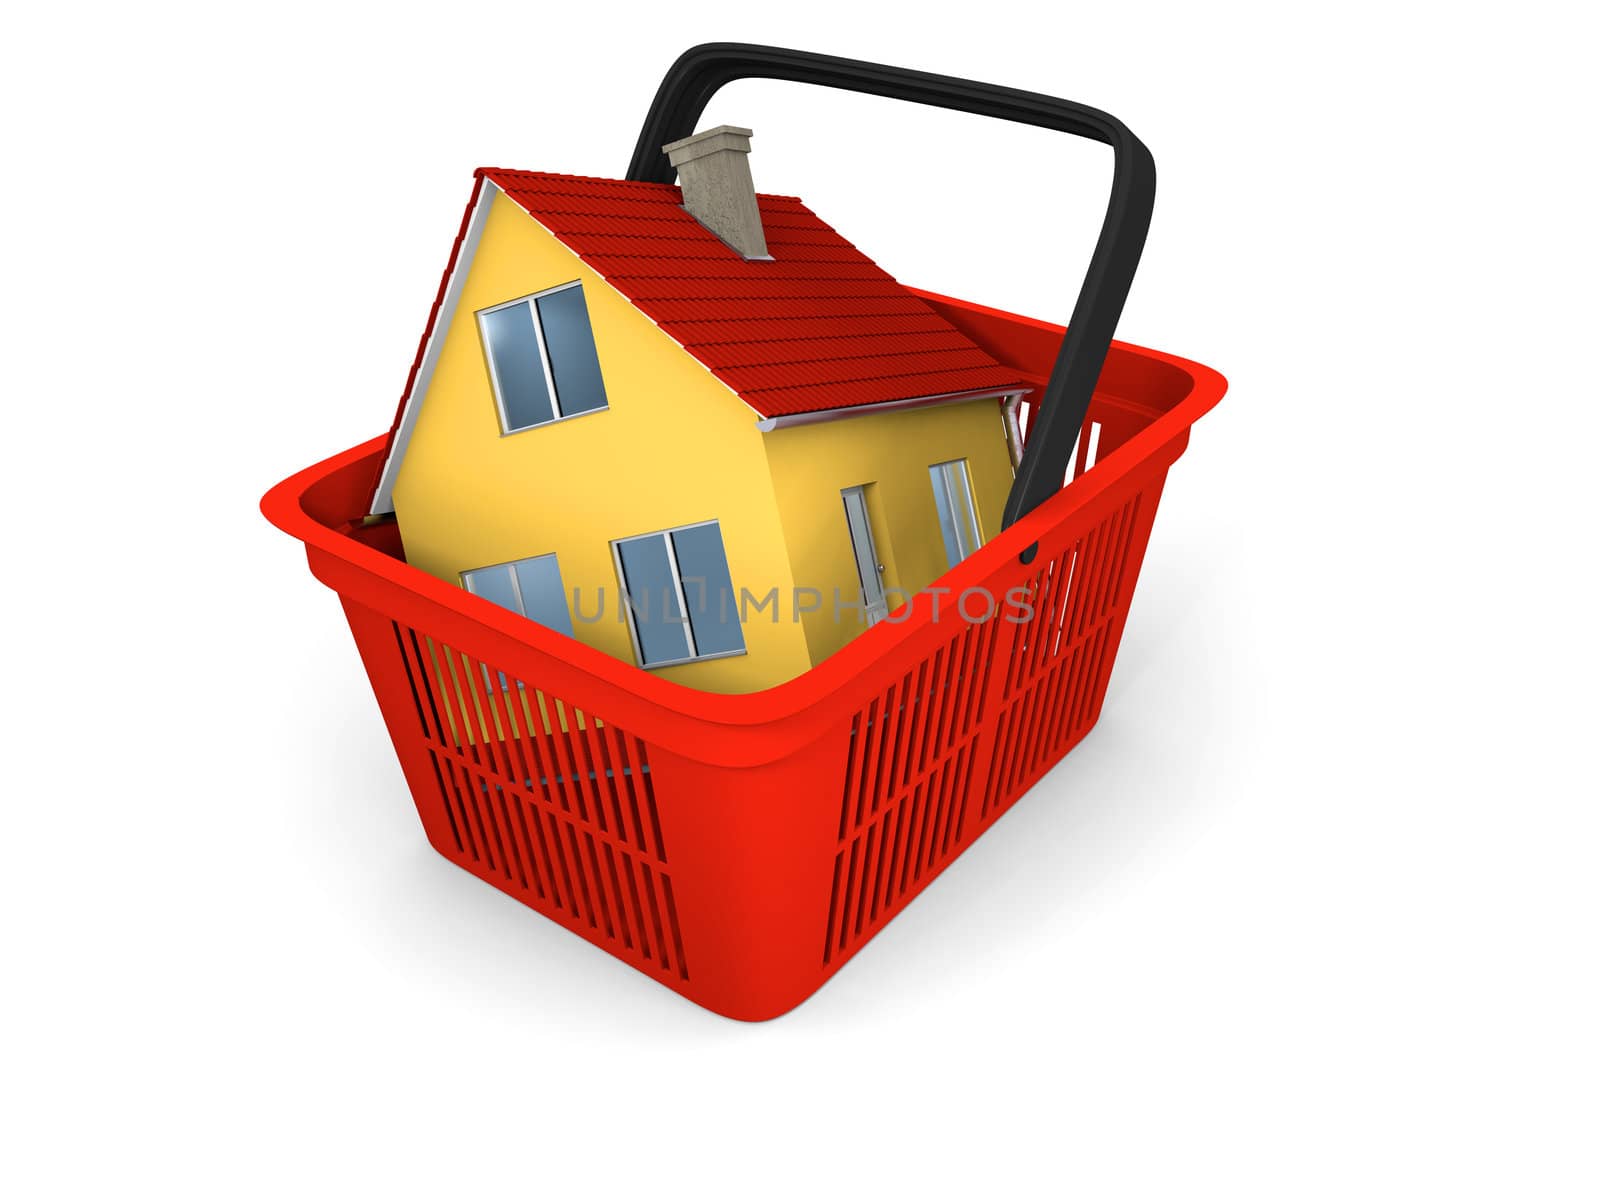 Model of house in shopping basket by Harvepino